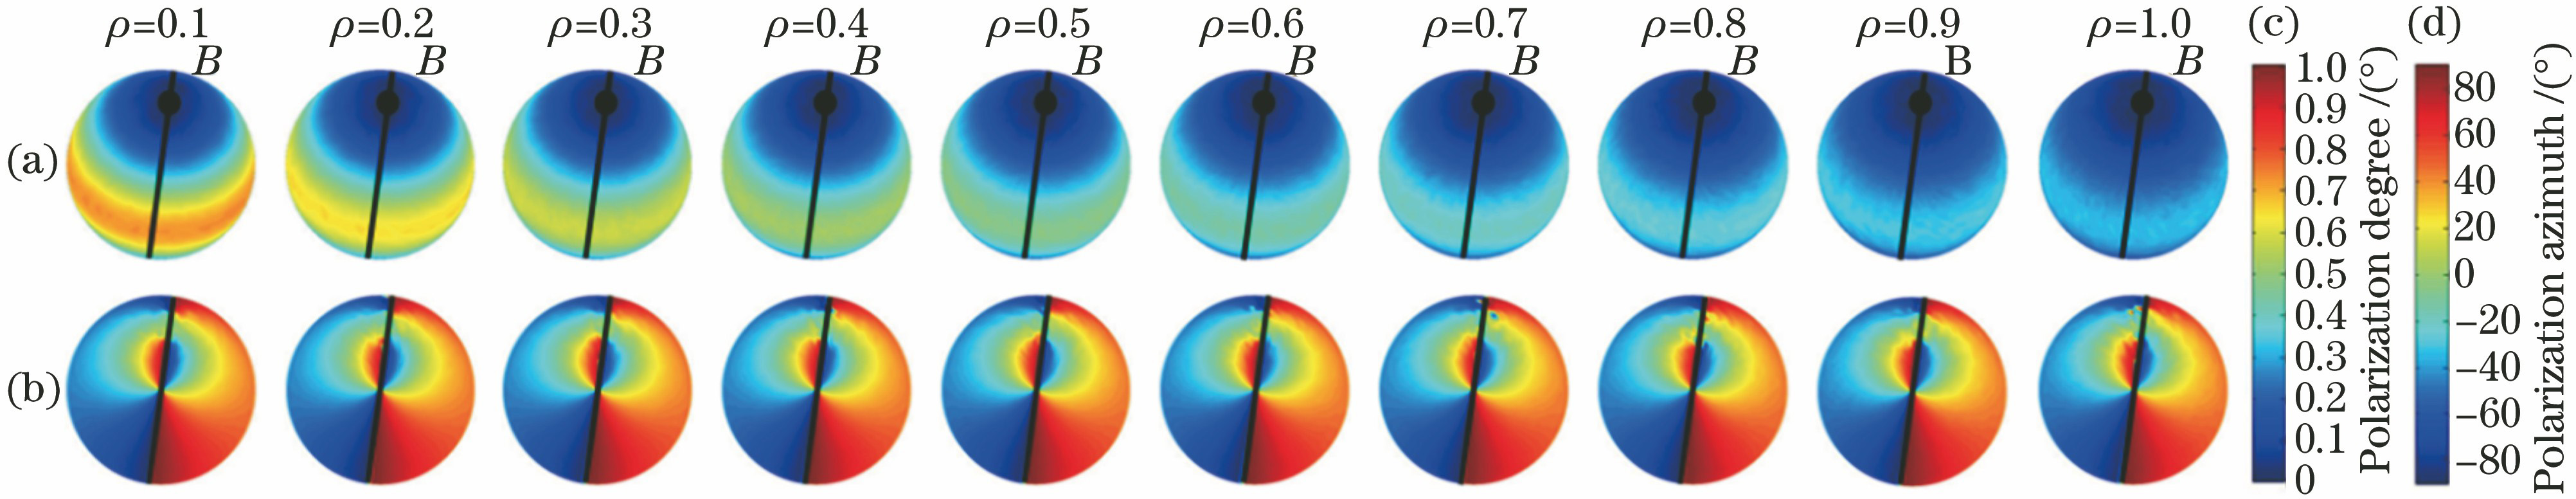 Simulation diagrams of sky polarization mode under different surface albedos. (a) Polarization degree; (b) polarization azimuth; (c) polarization degree legend; (d) polarization azimuth legend